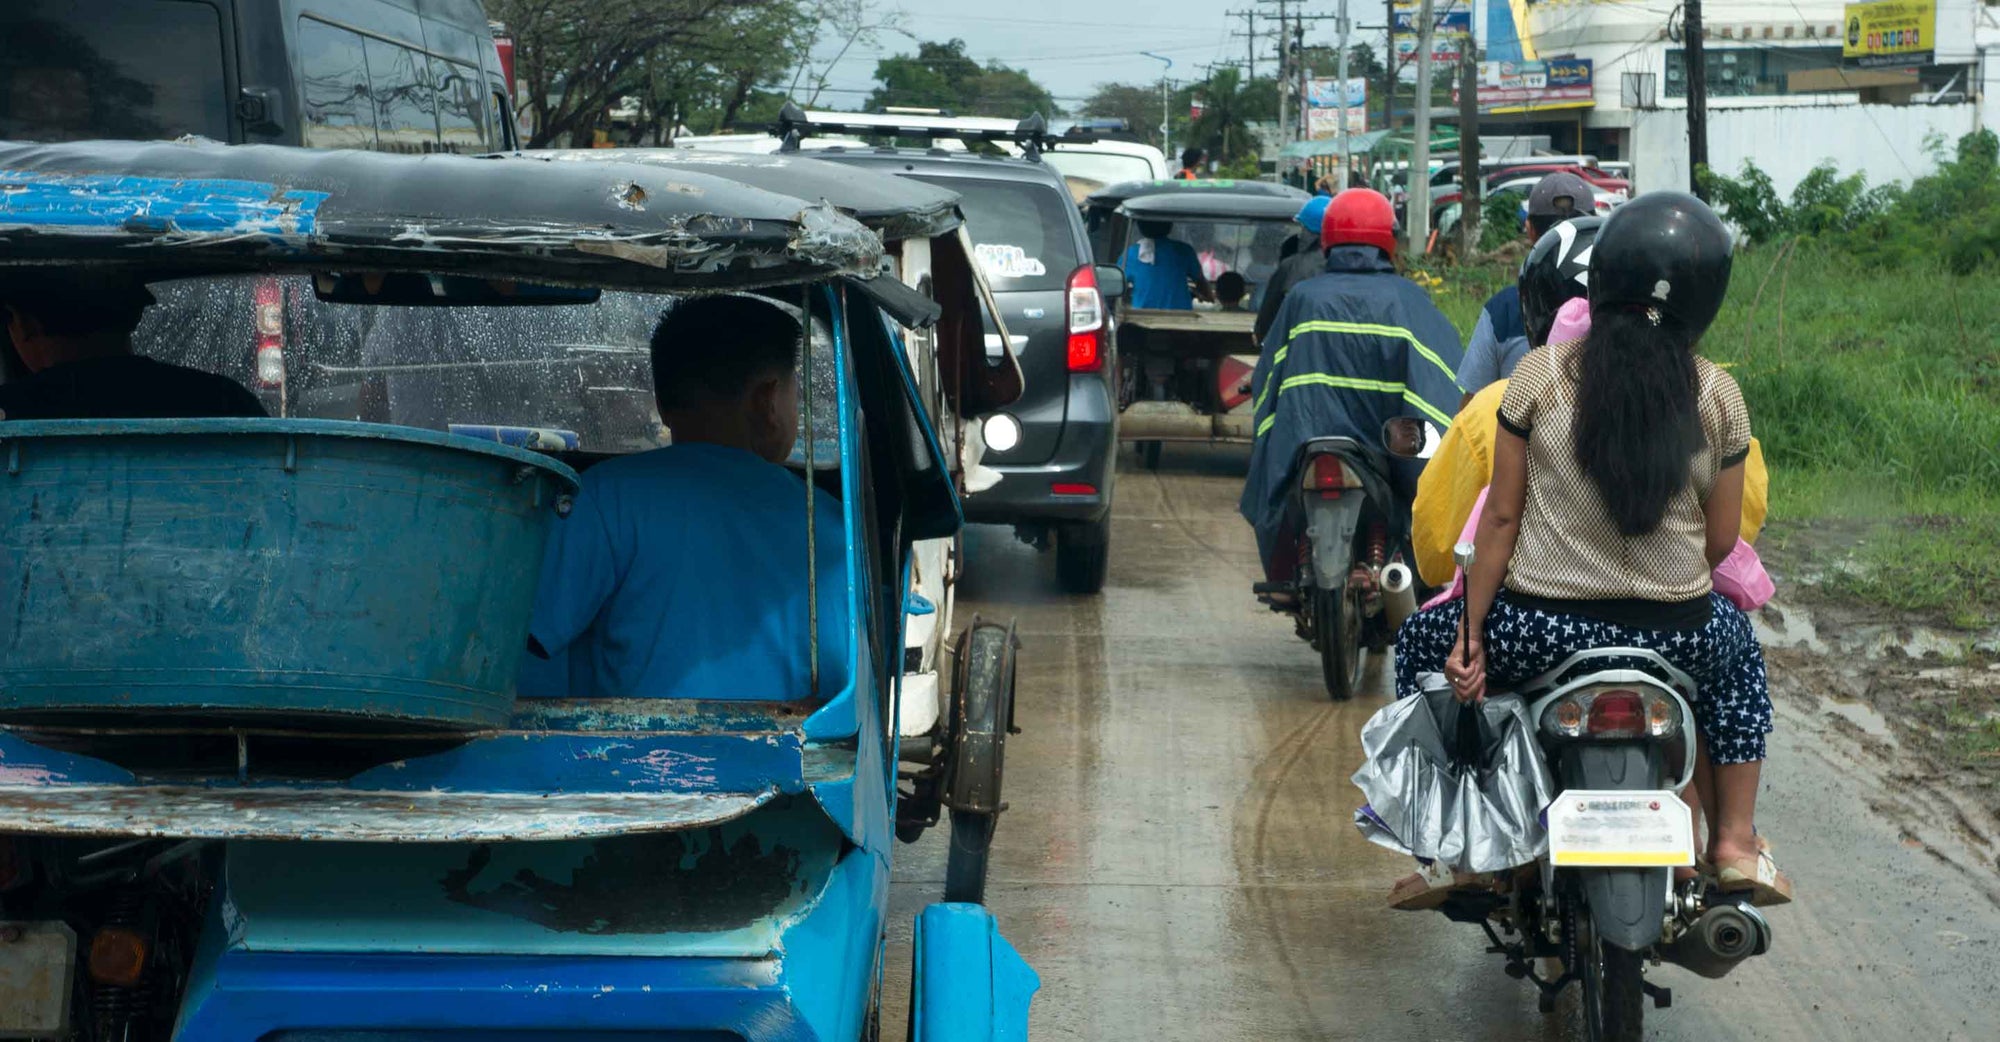 Filipino/a drivers on motorcycles and in cars on a wet, congested road in what is ostensibly the Philippines.